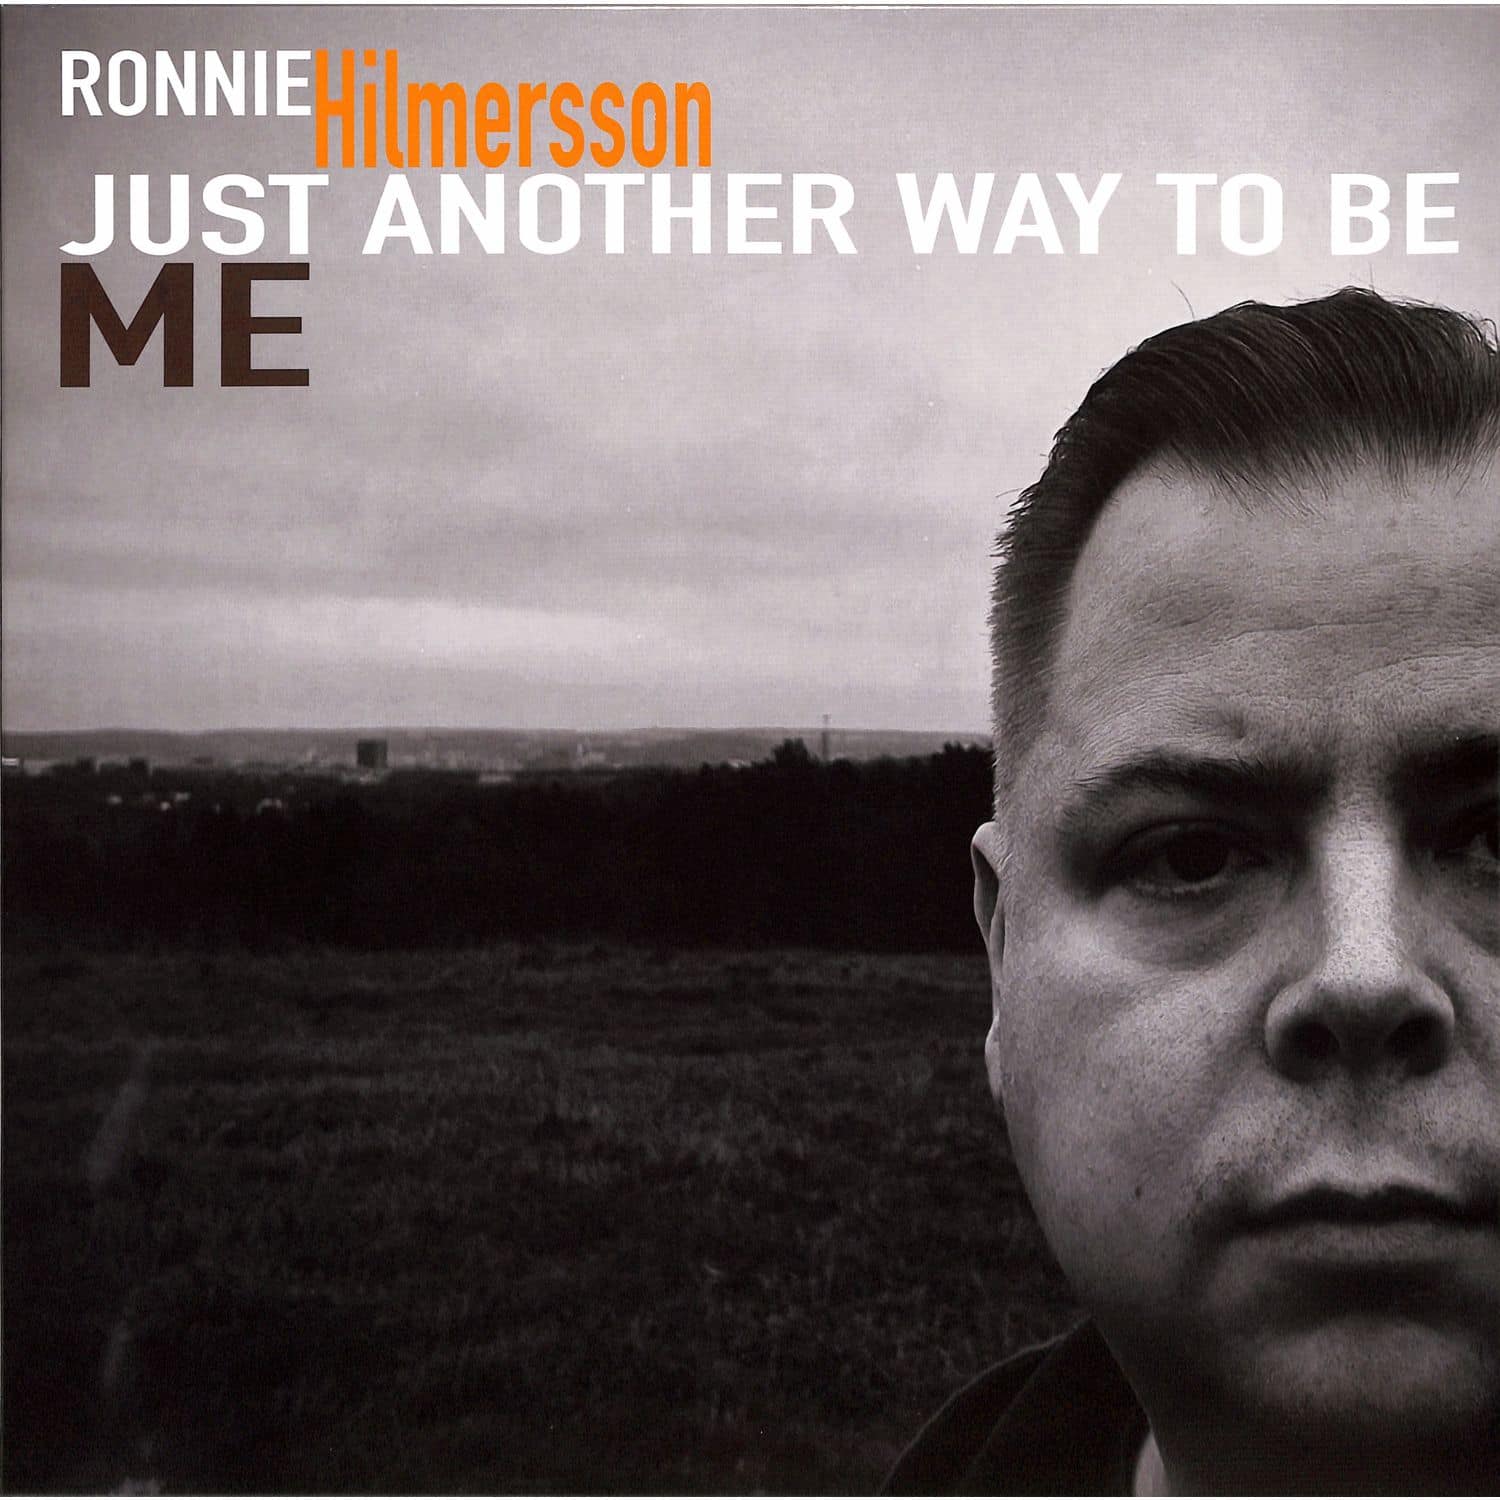  Ronnie Hilmersson - JUST ANOTHER WAY TO BE ME 